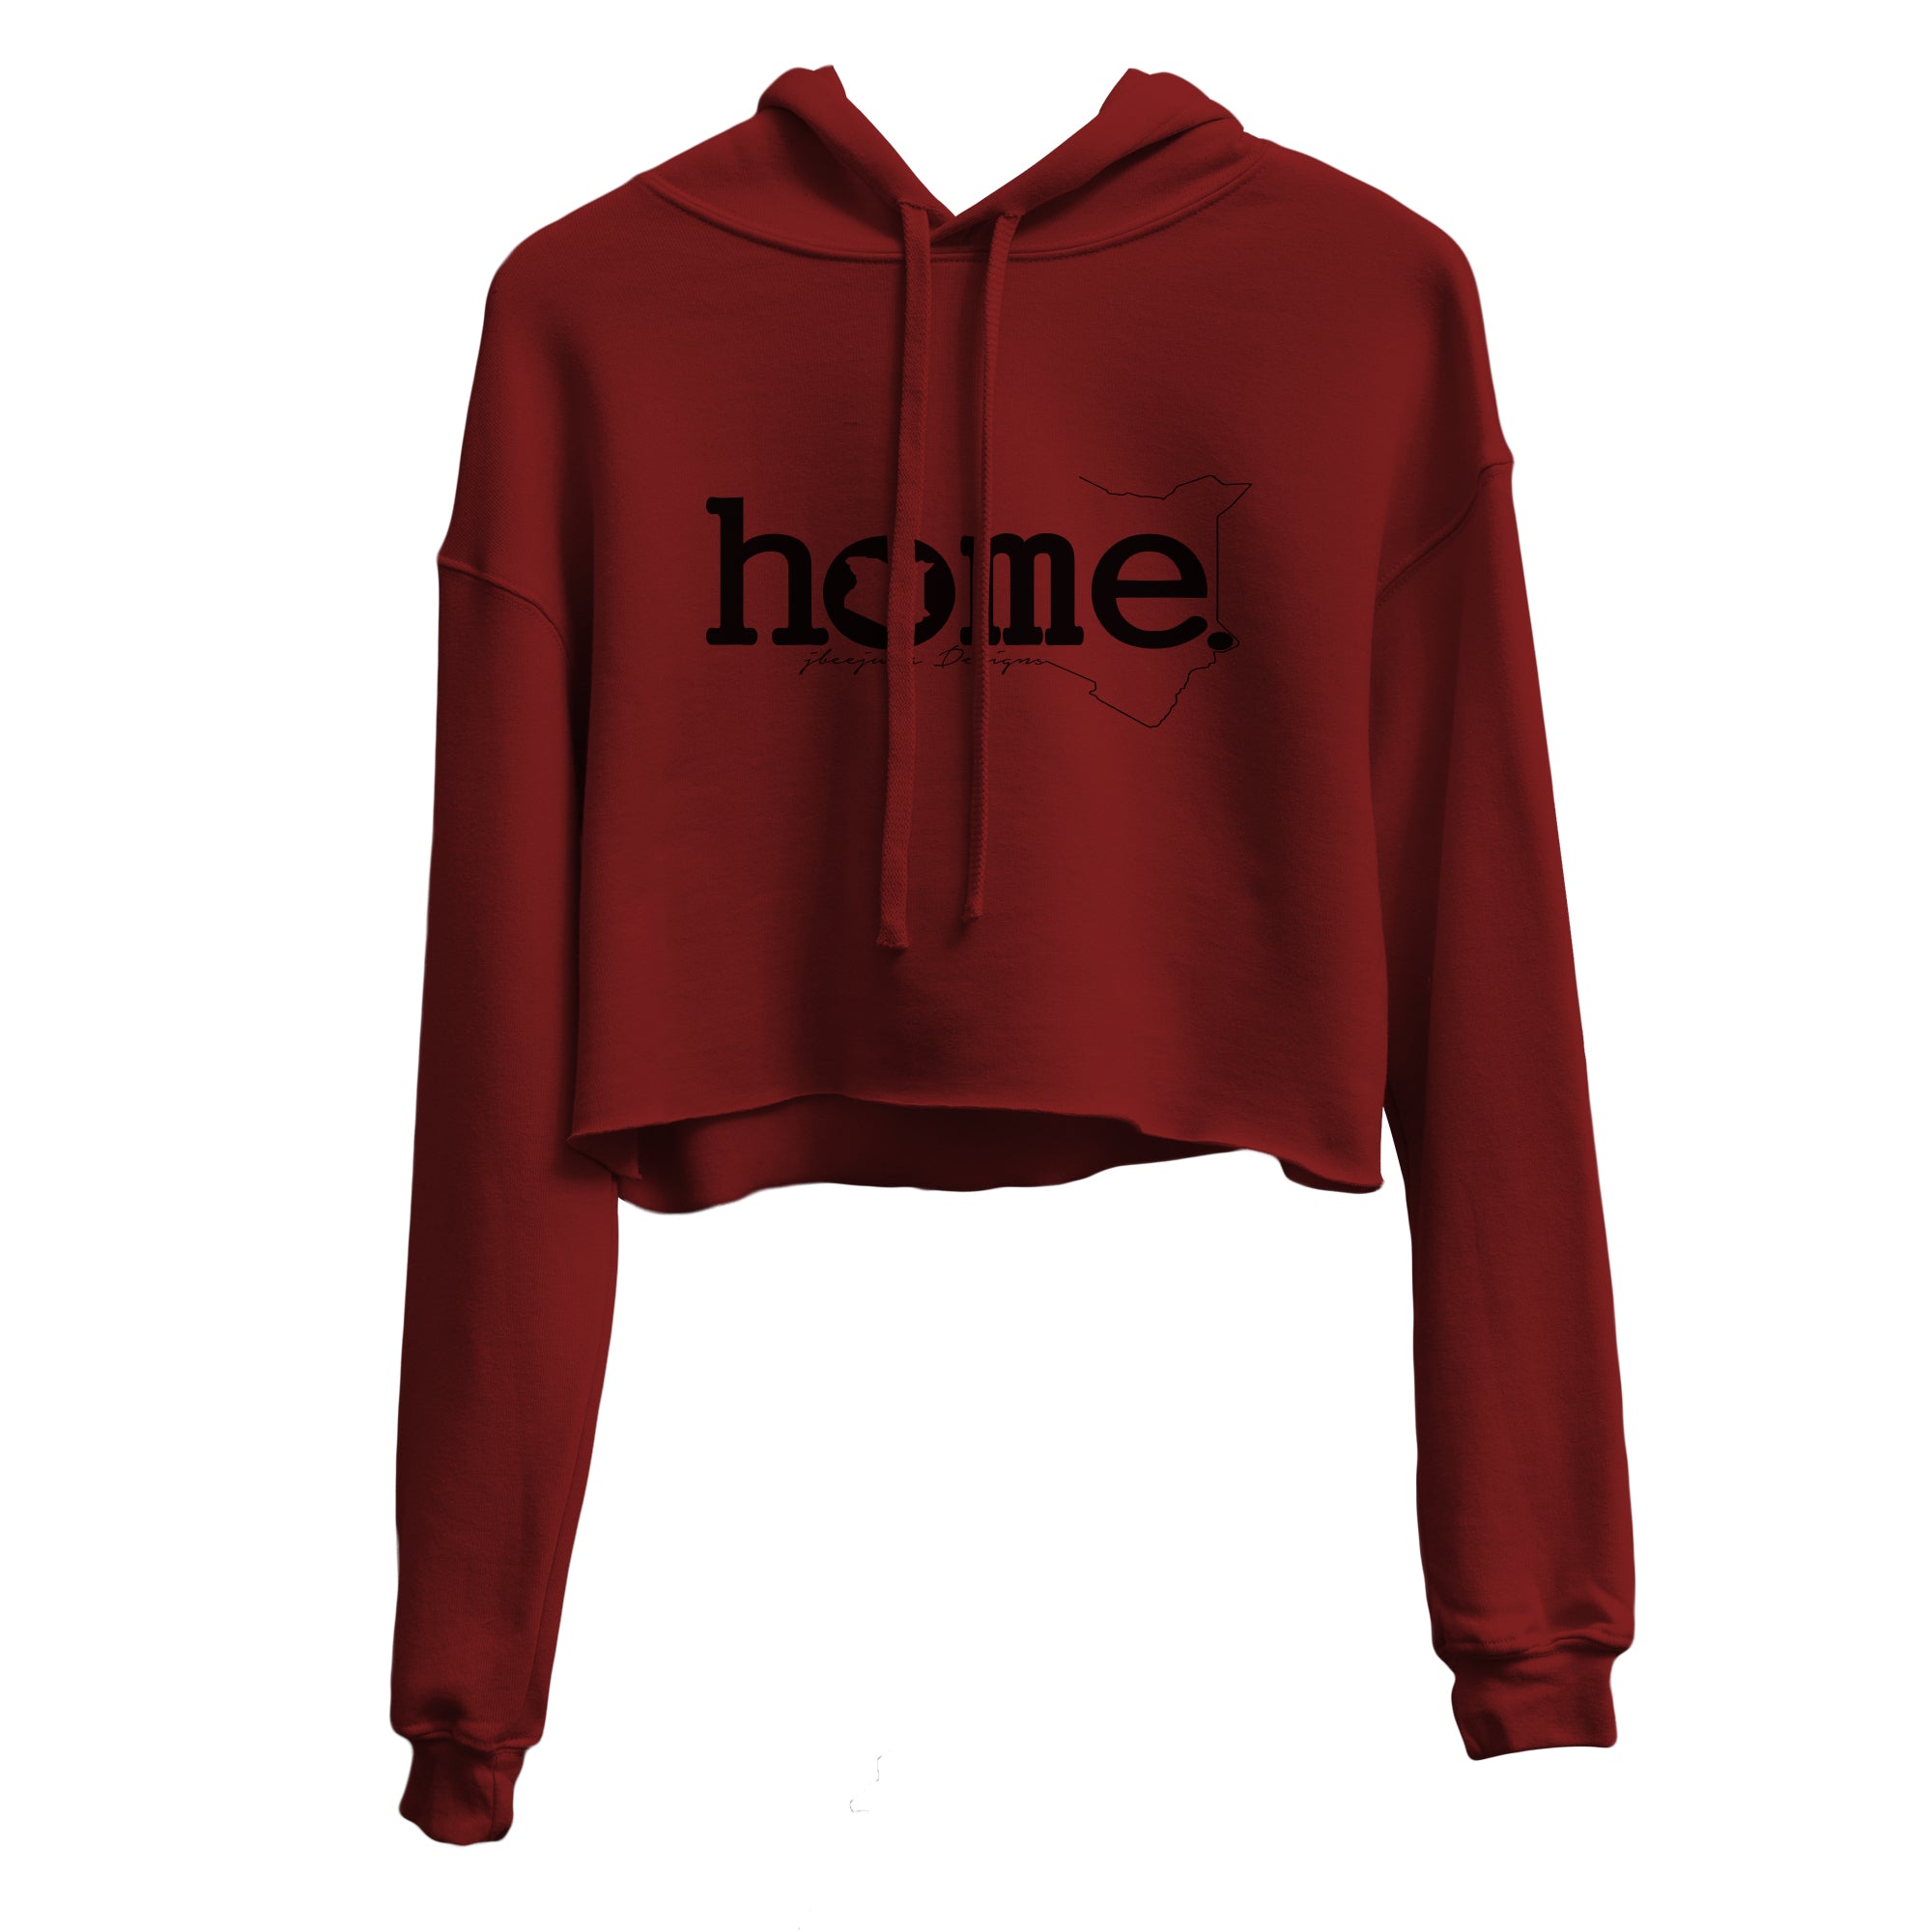 JBEEJURA DESINGZ | home_254 Burgundy Cropped Hoodie (heavy fabric) with a black classic words logo